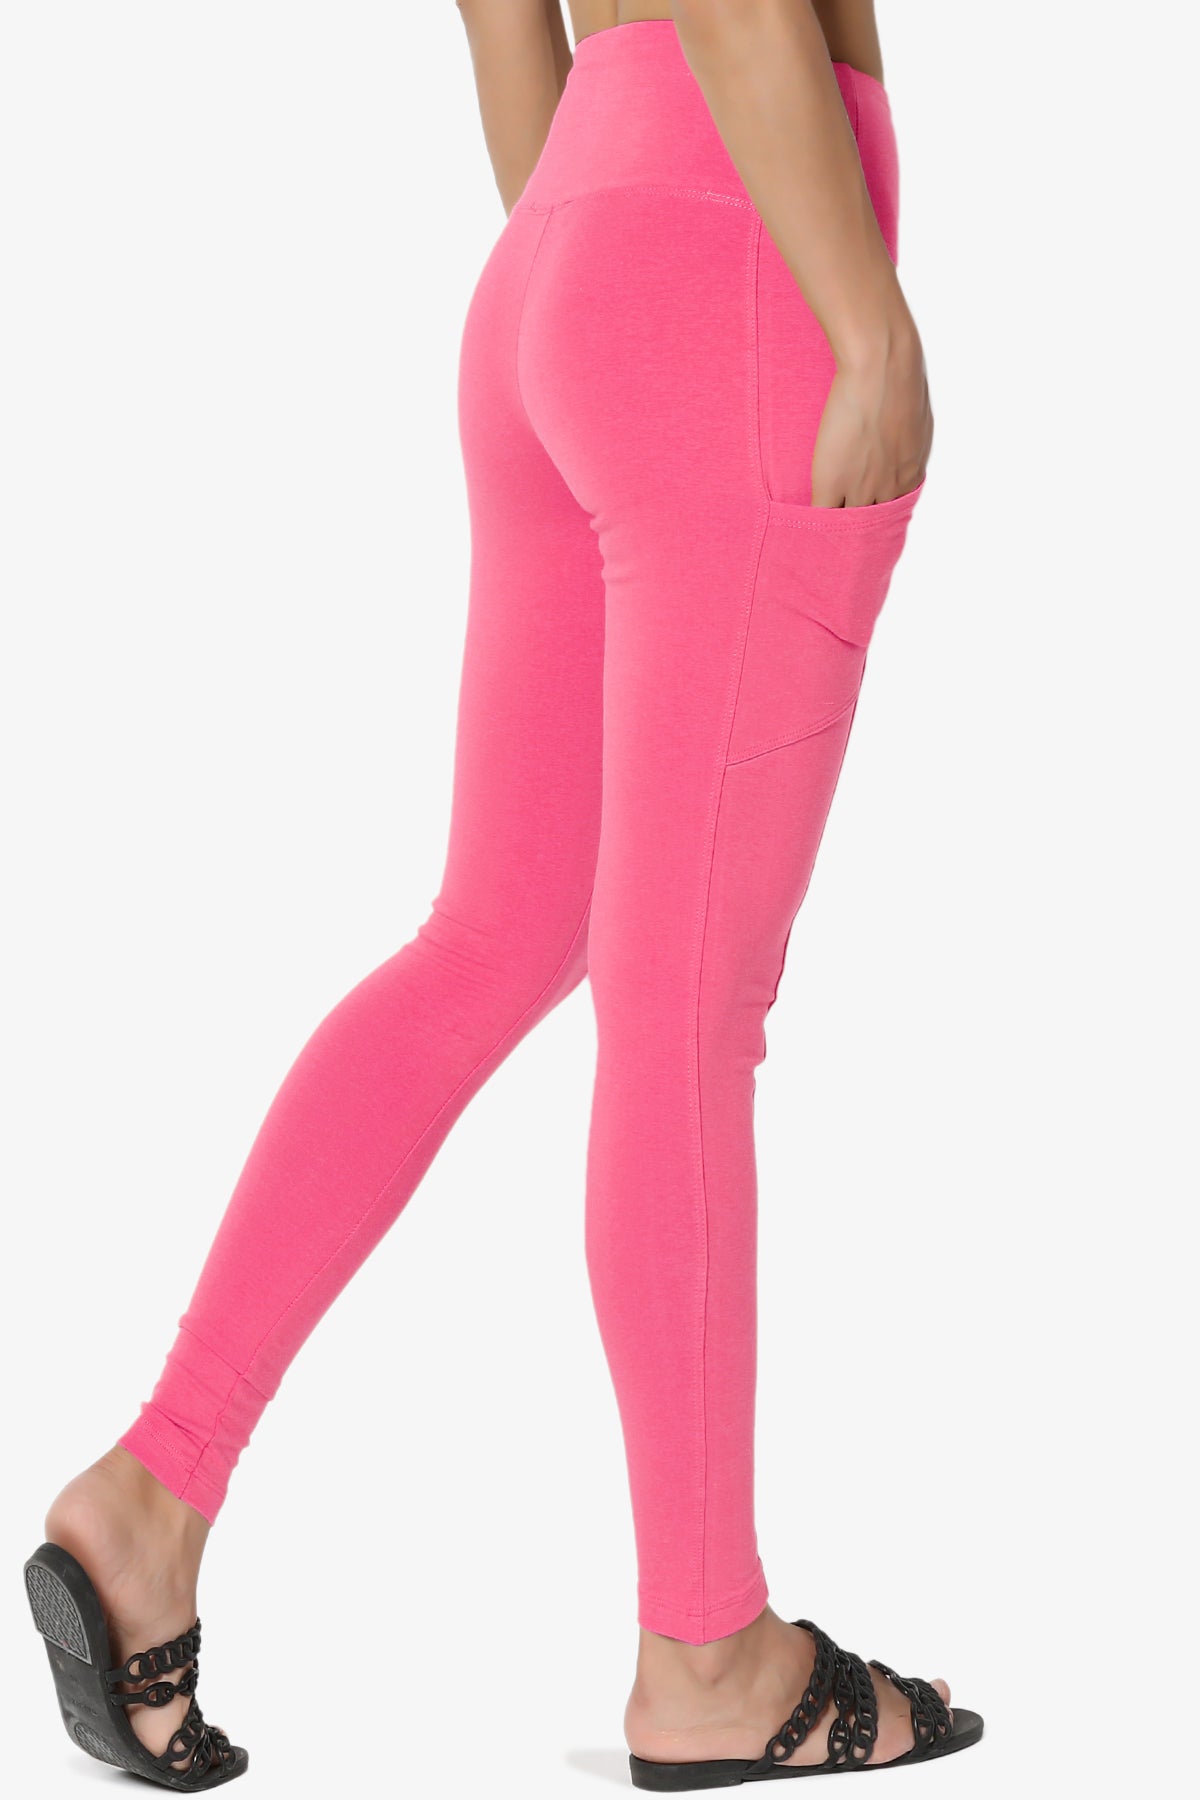 Ansley Luxe Cotton Leggings with Pockets FUCHSIA_4